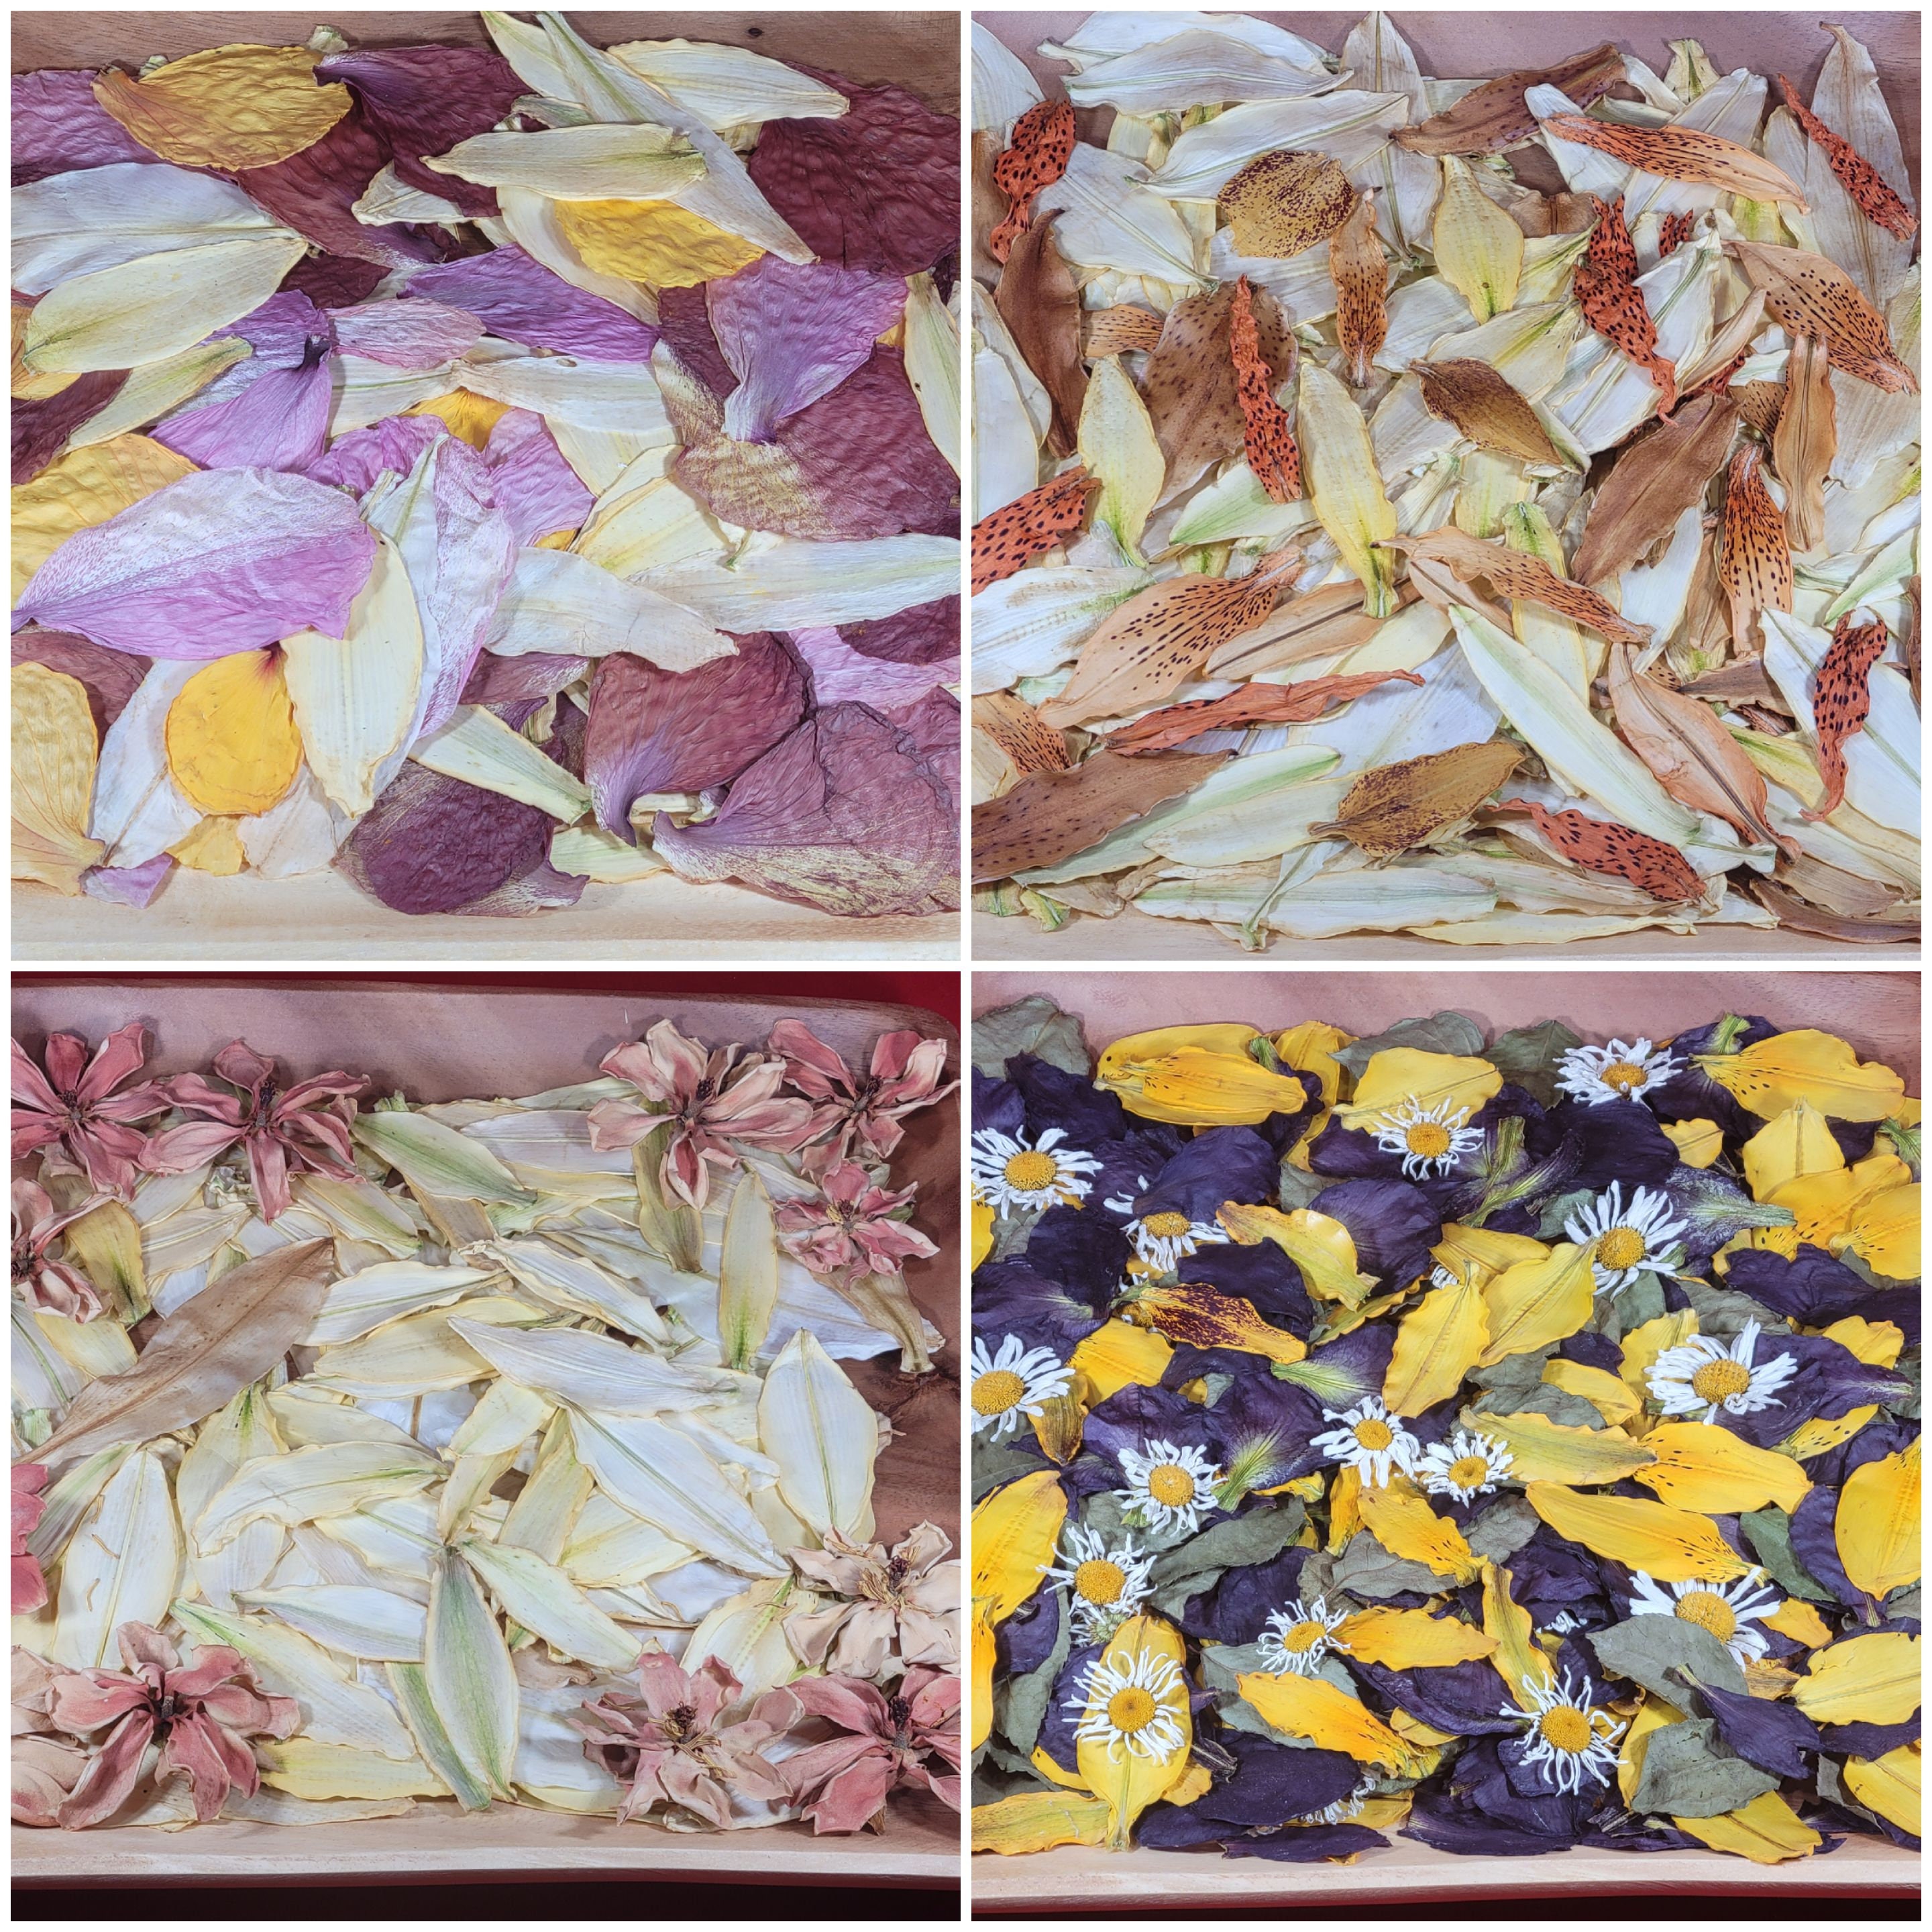 Dried Flowers & Petals Lily Hibiscus Magnolia Daisy Organic Home Grown No Chemicals Or Preservatives Added Wedding Cake Decor